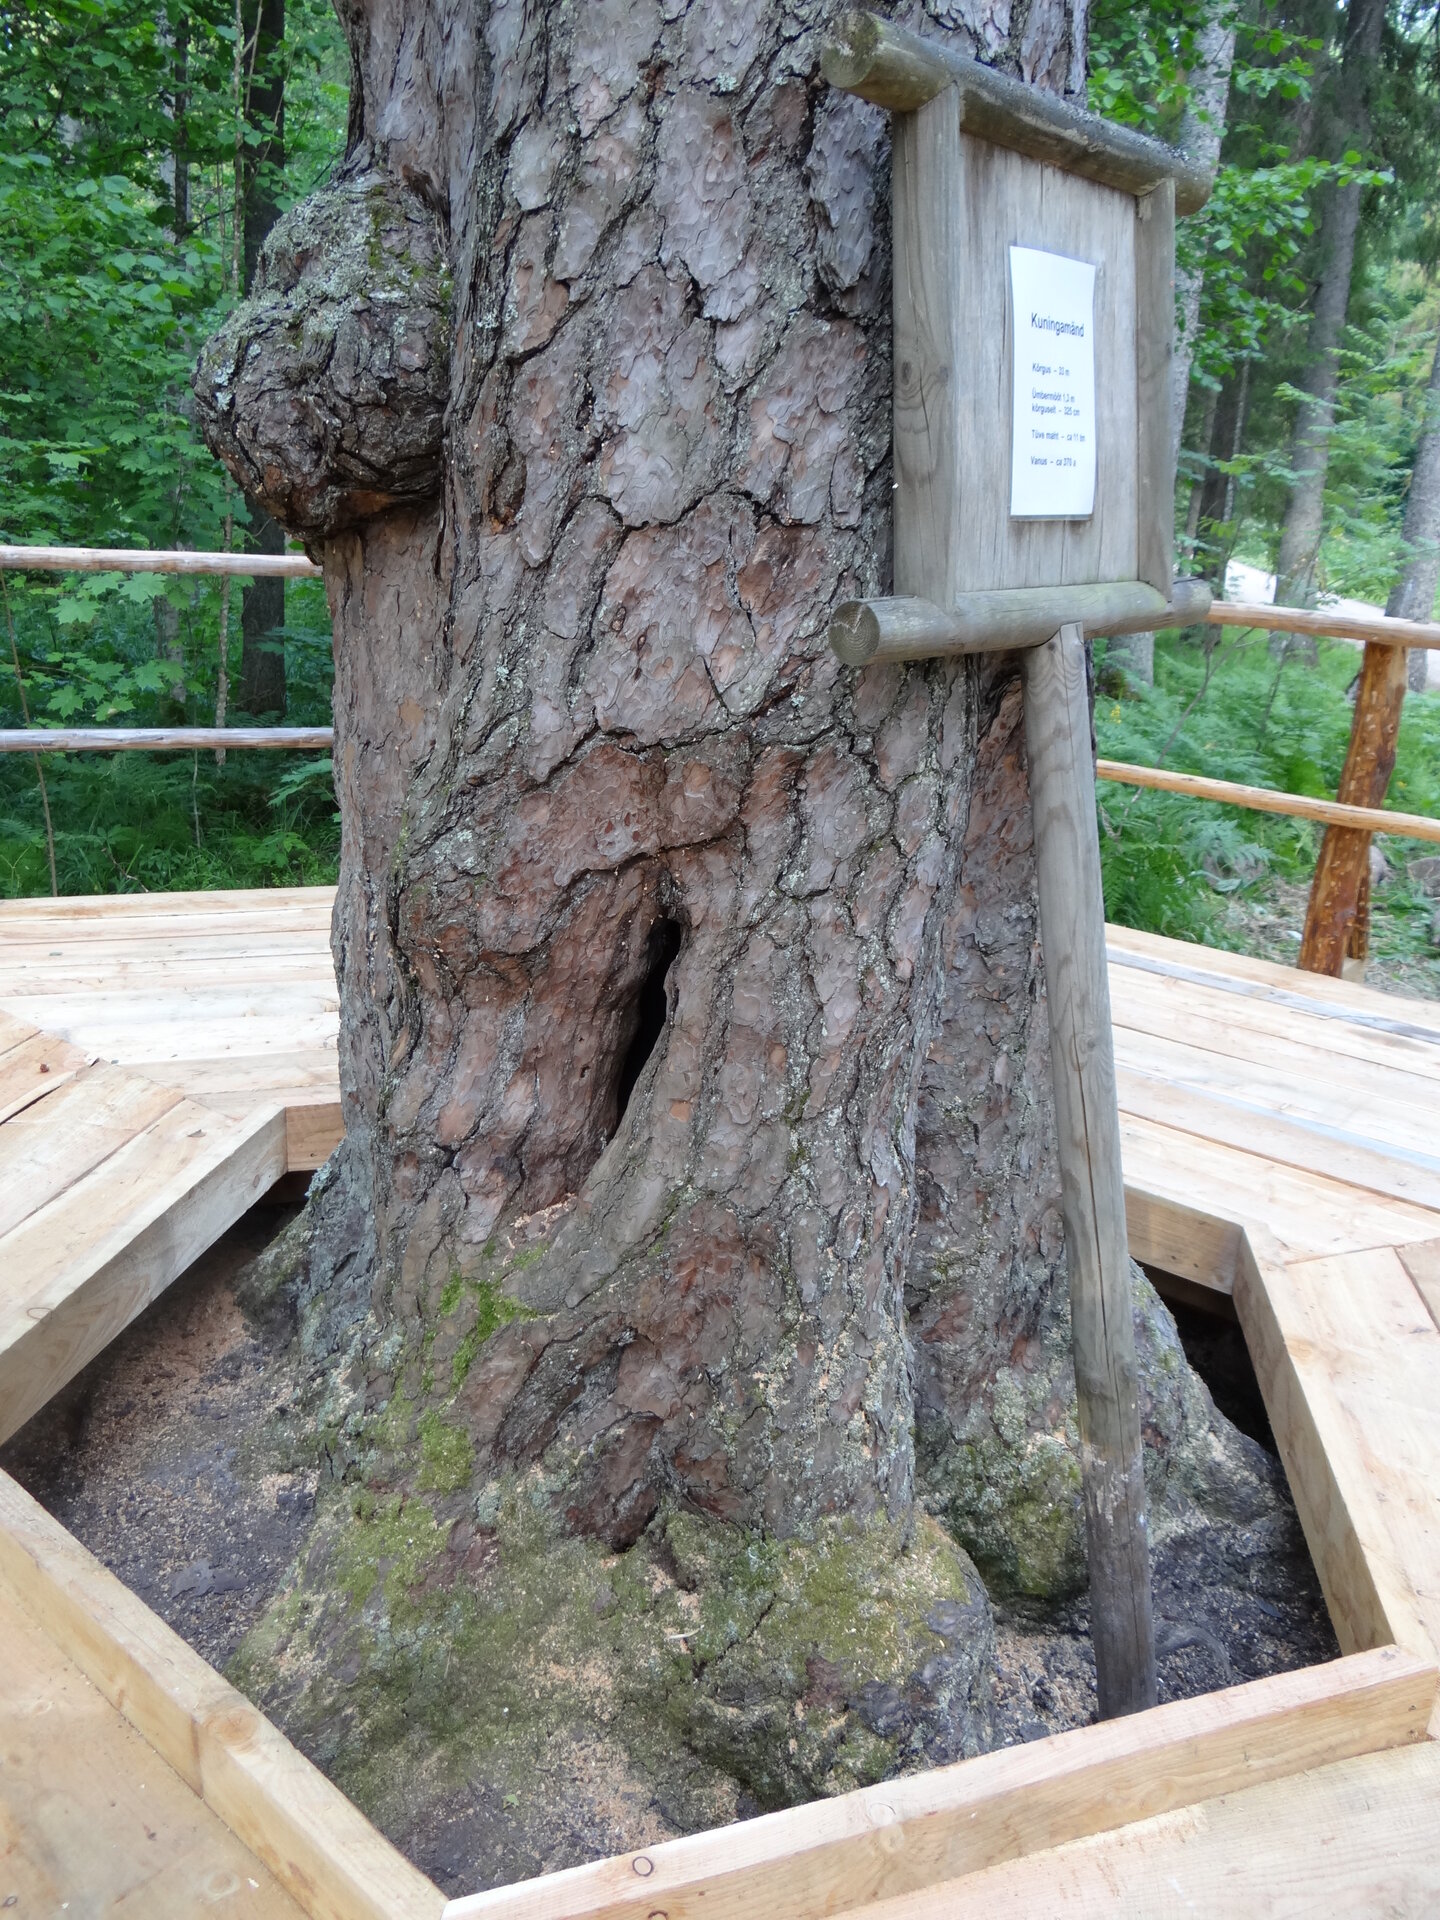 Large trunk of the oldest tree in Estonia